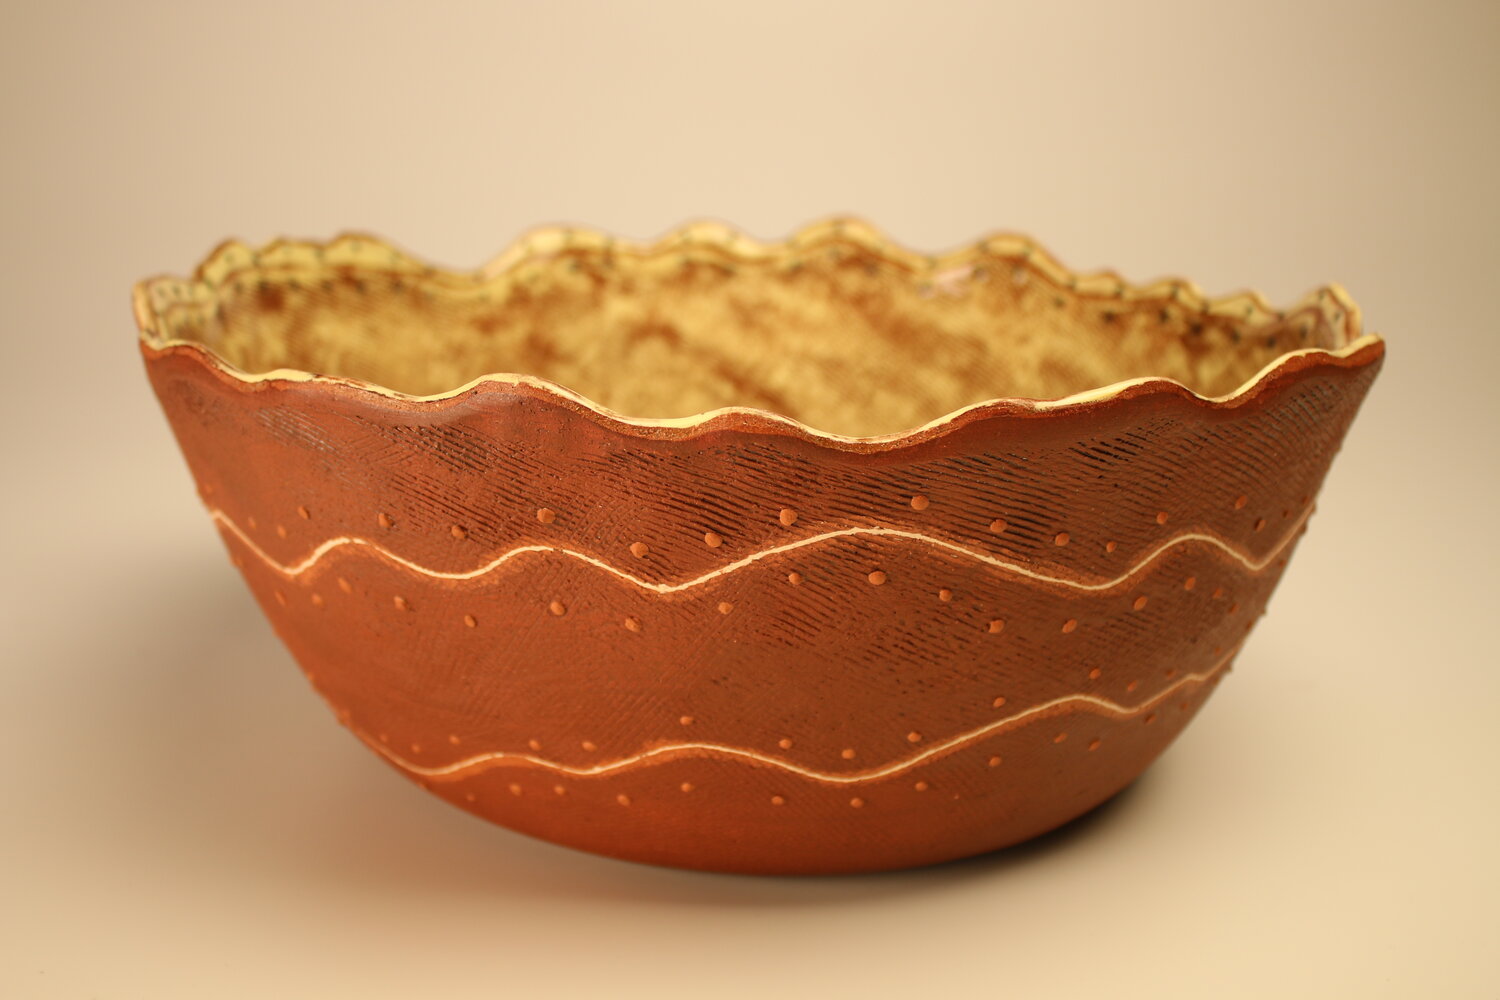 Large brown bowl with white inlay and undulating rim, image courtesy of the artist